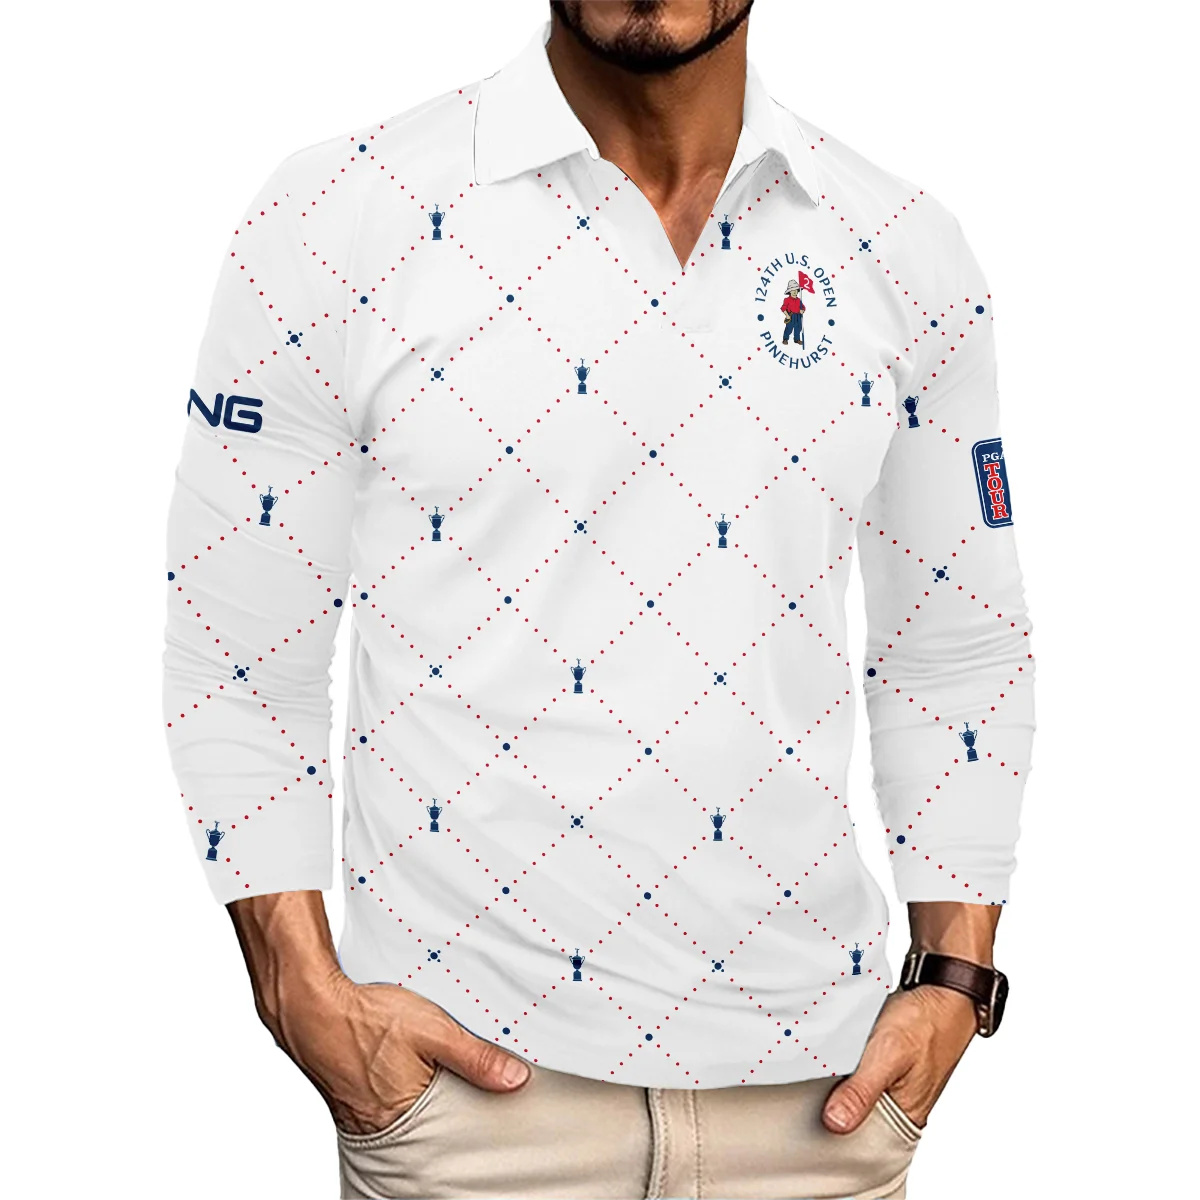 Argyle Pattern With Cup 124th U.S. Open Pinehurst Ping Hoodie Shirt Style Classic Hoodie Shirt